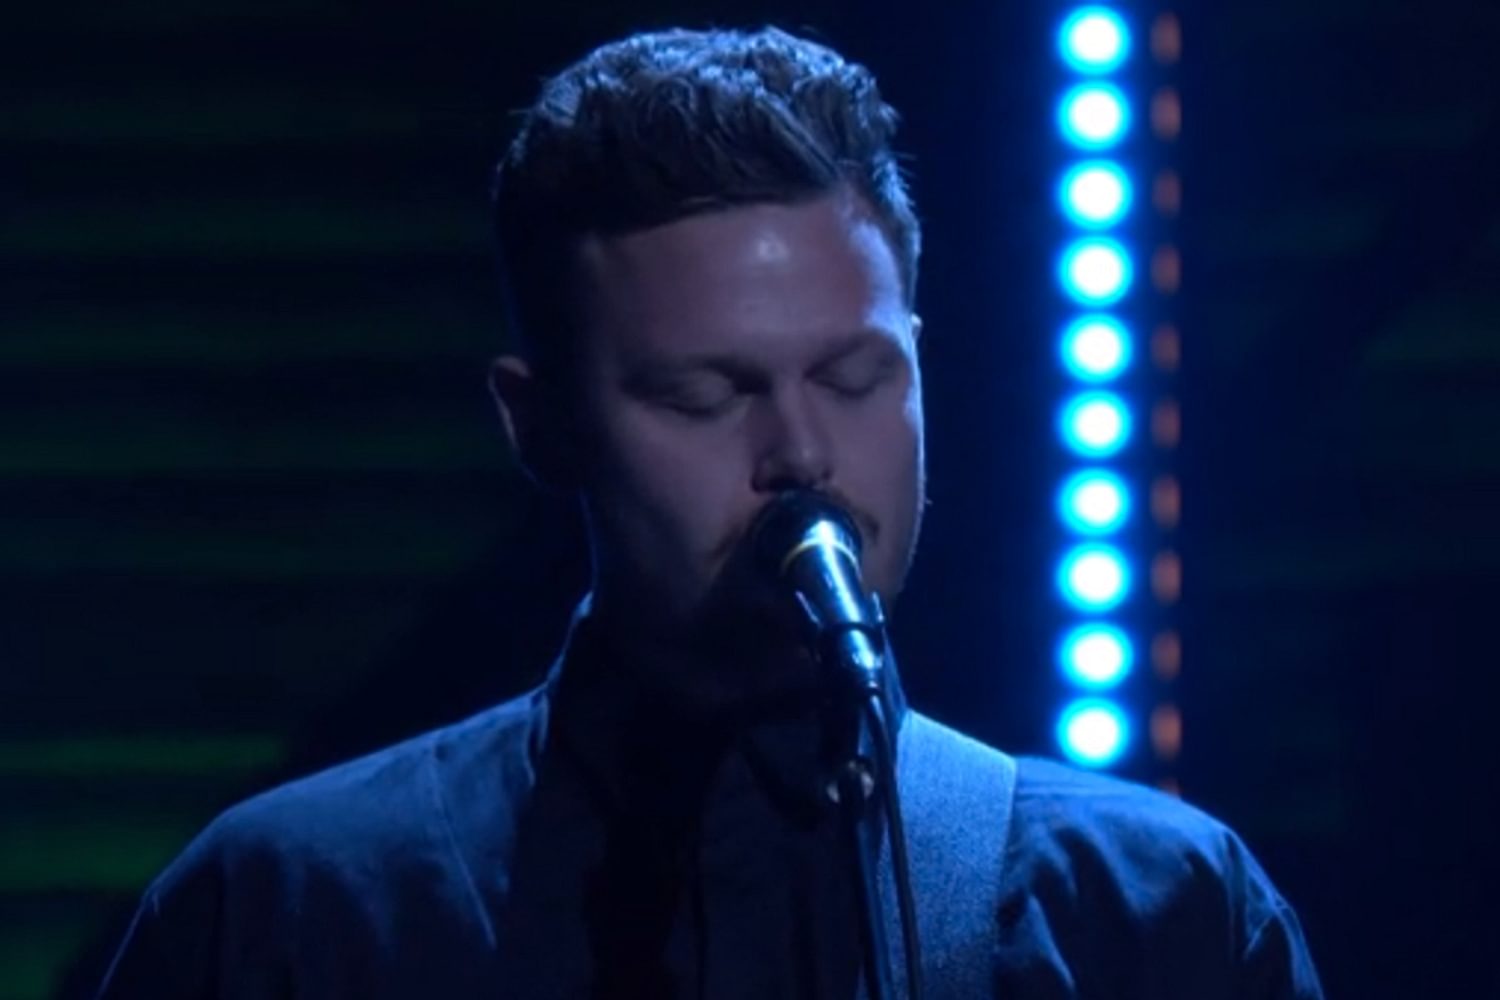 Watch Alt-J play ‘Every Other Freckle’ on Conan